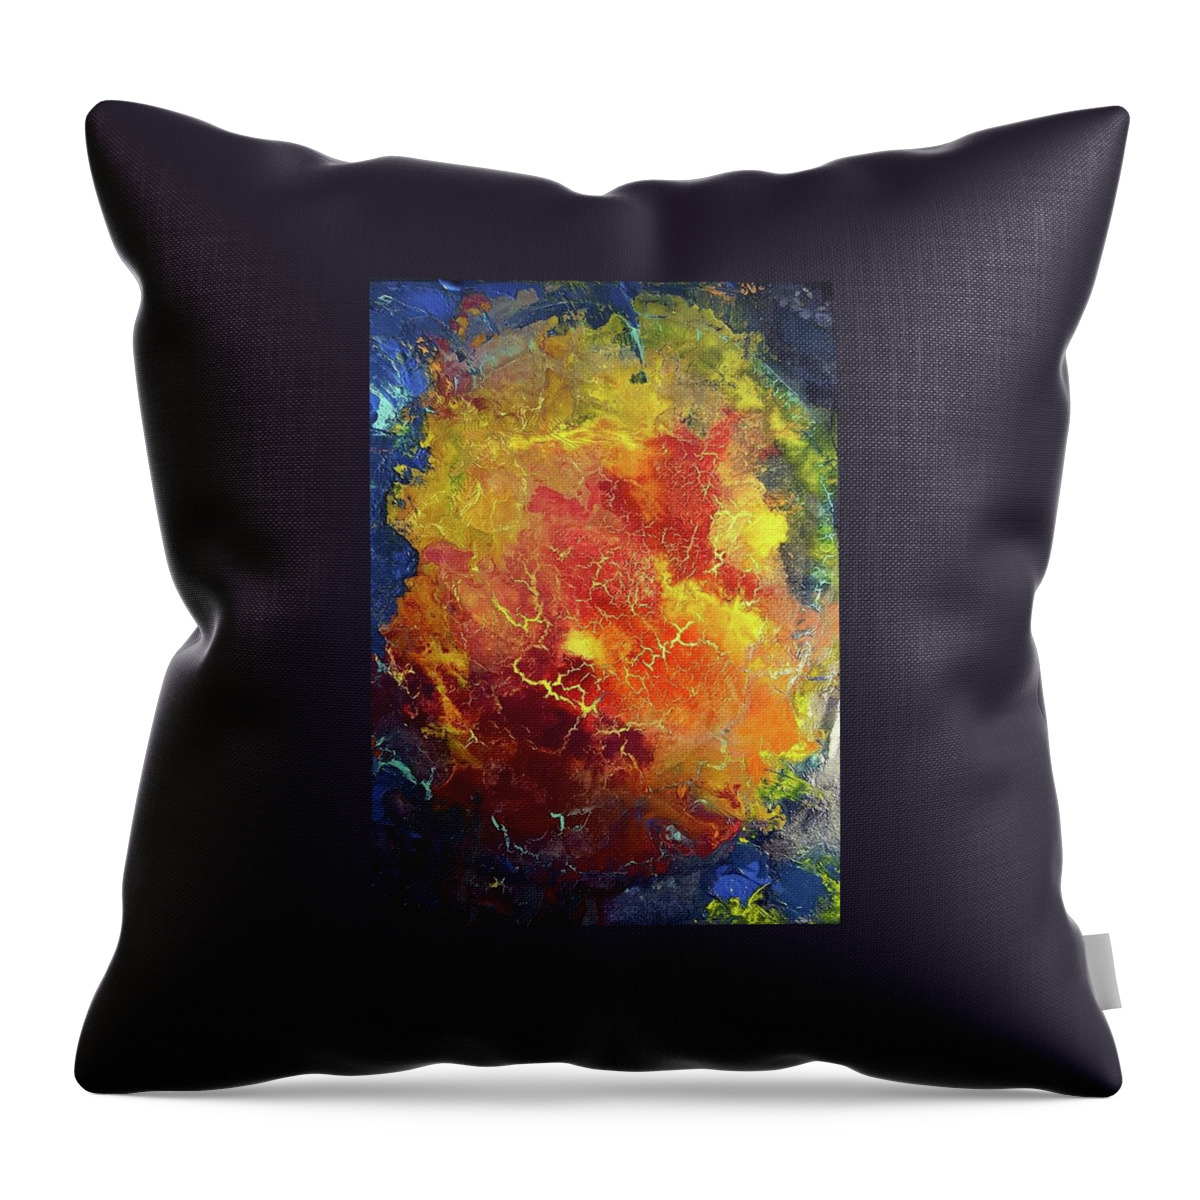 #abstractart #acrylicartforsale #artforsale #paintingsforsale #acrylicinks #acrylicinkpaintings Throw Pillow featuring the painting Rose Nebula by Cynthia Silverman